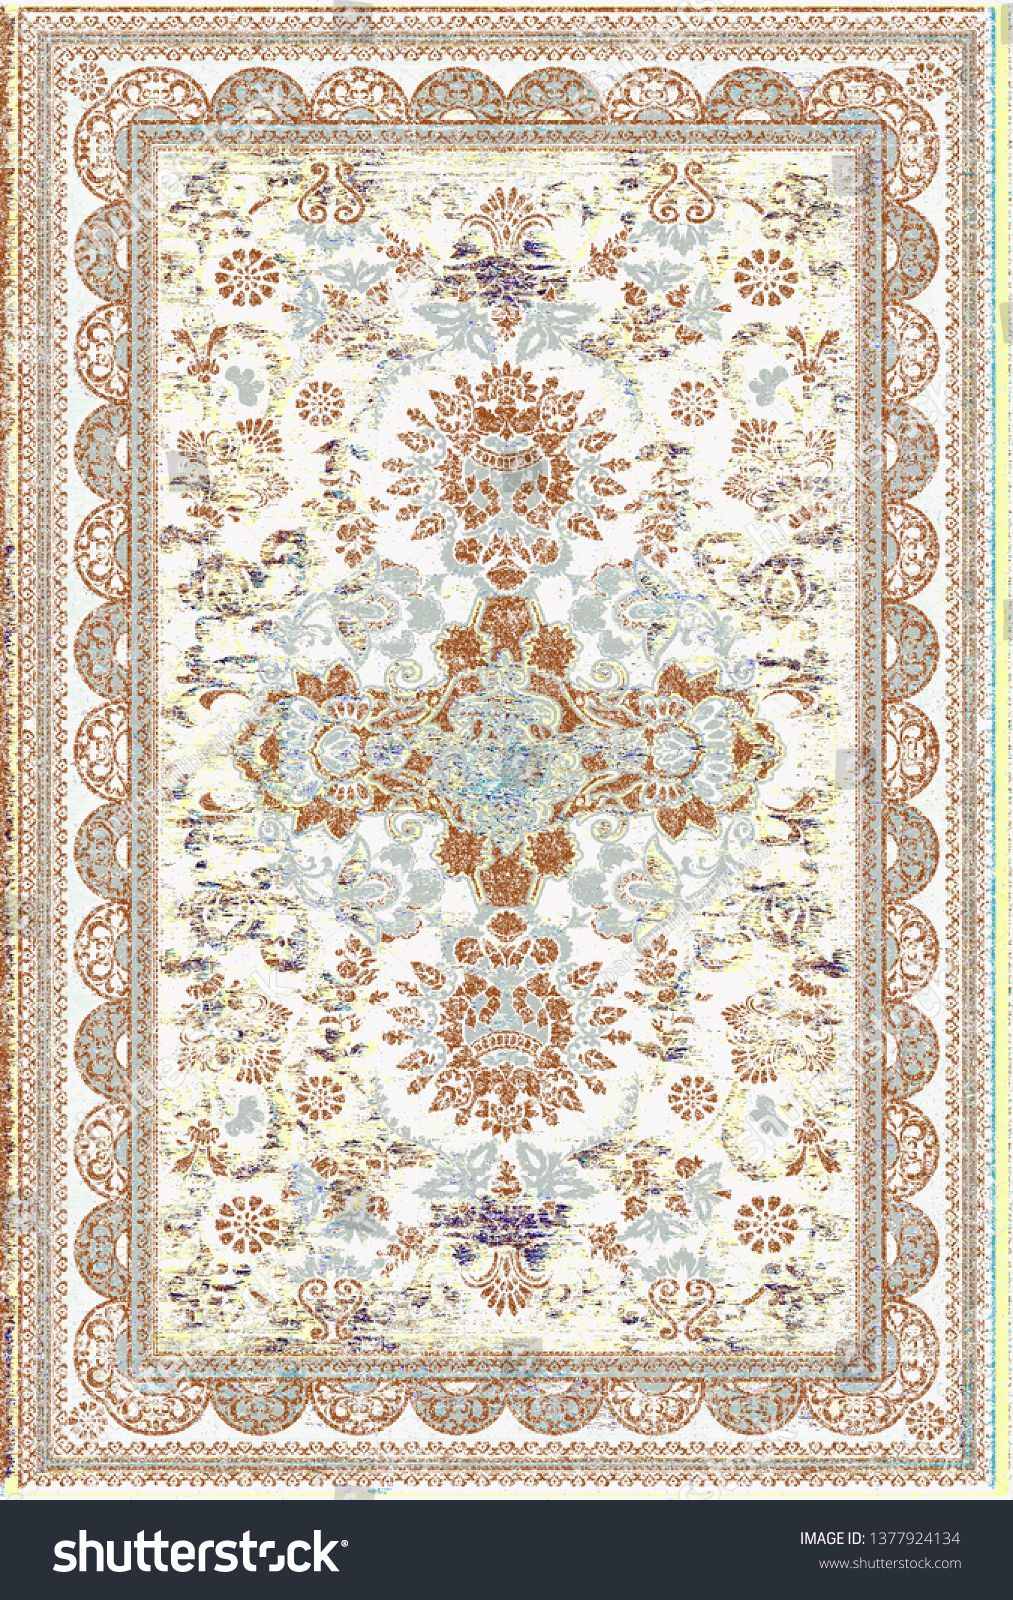 Art Vintage Traditional Classical Carpet Rug Stock Illustration 1377924134  | Shutterstock Within Classical Rugs (View 6 of 15)